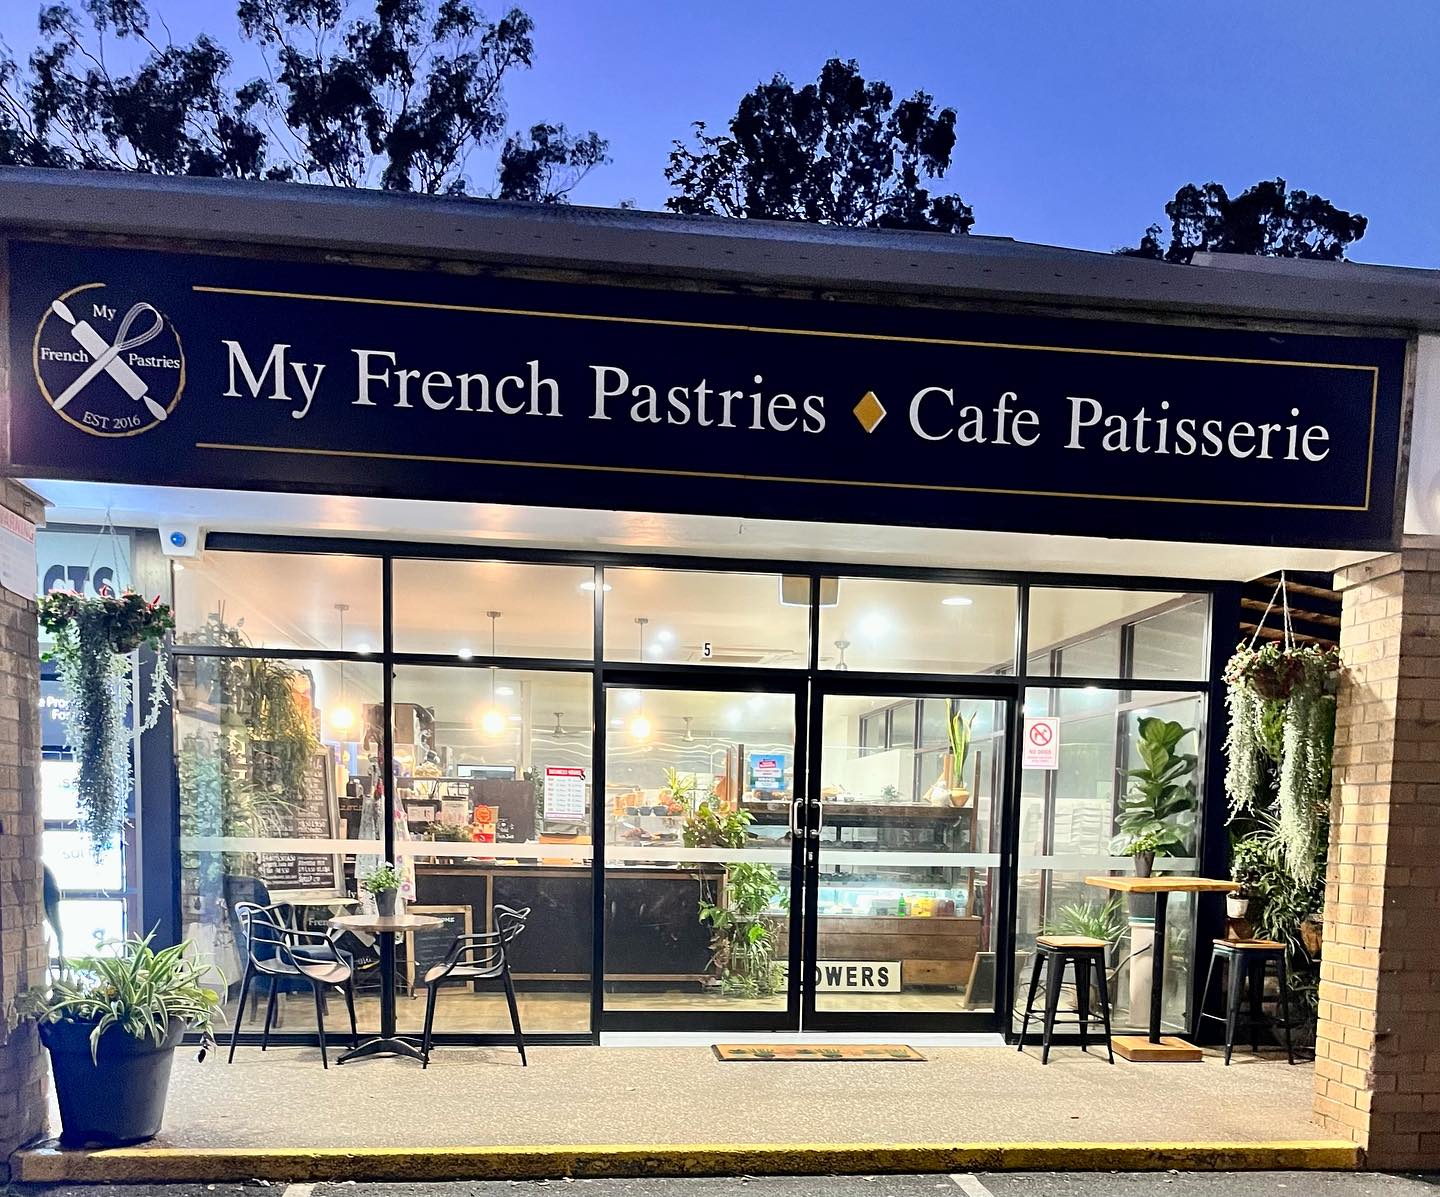 1 My French pastries shop